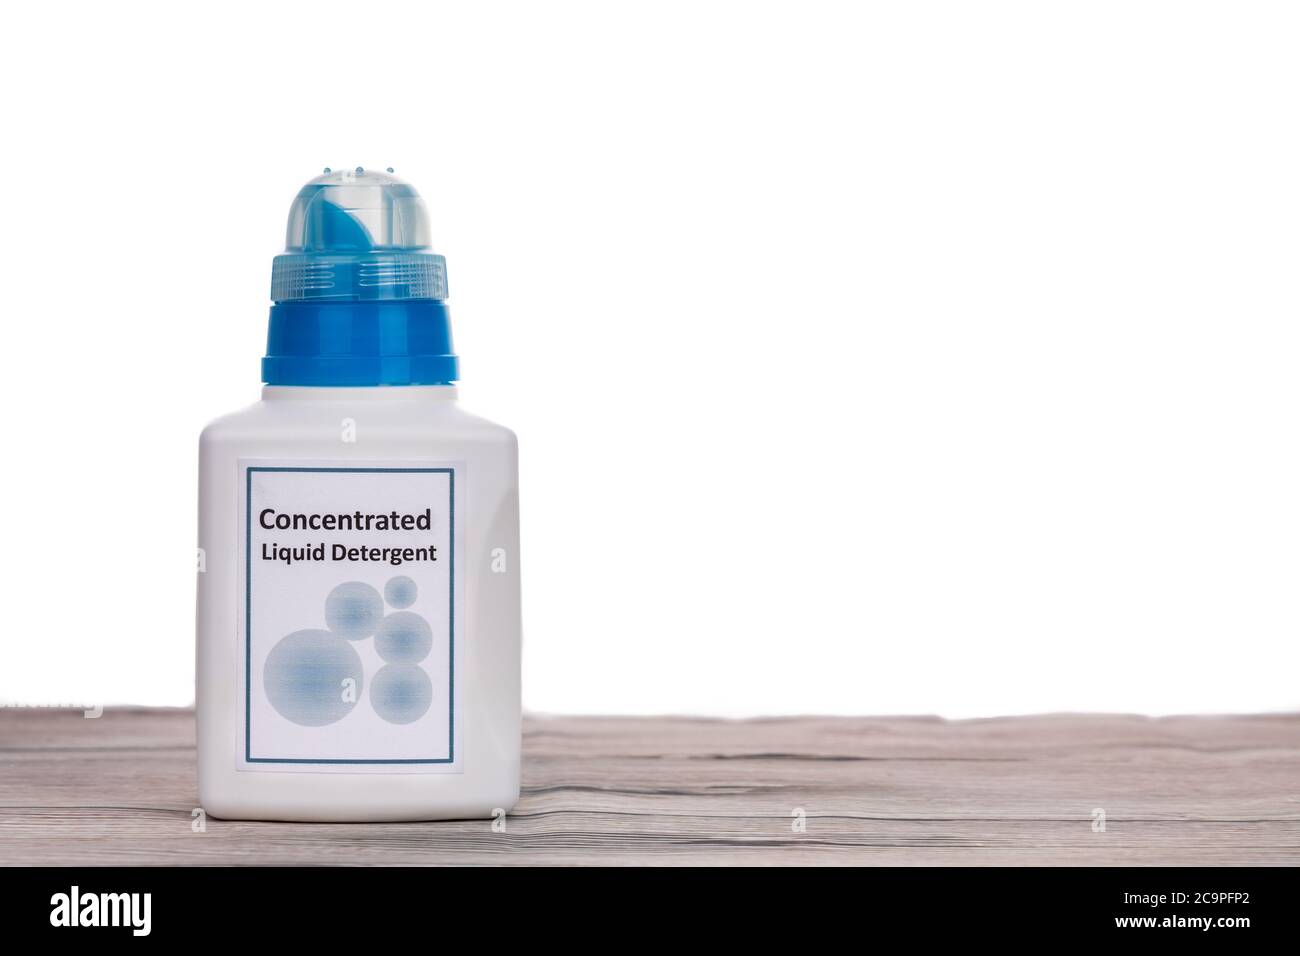 Tecnologically advanced compact concentrated laundry liquid detergent on wooden surface against white background Stock Photo